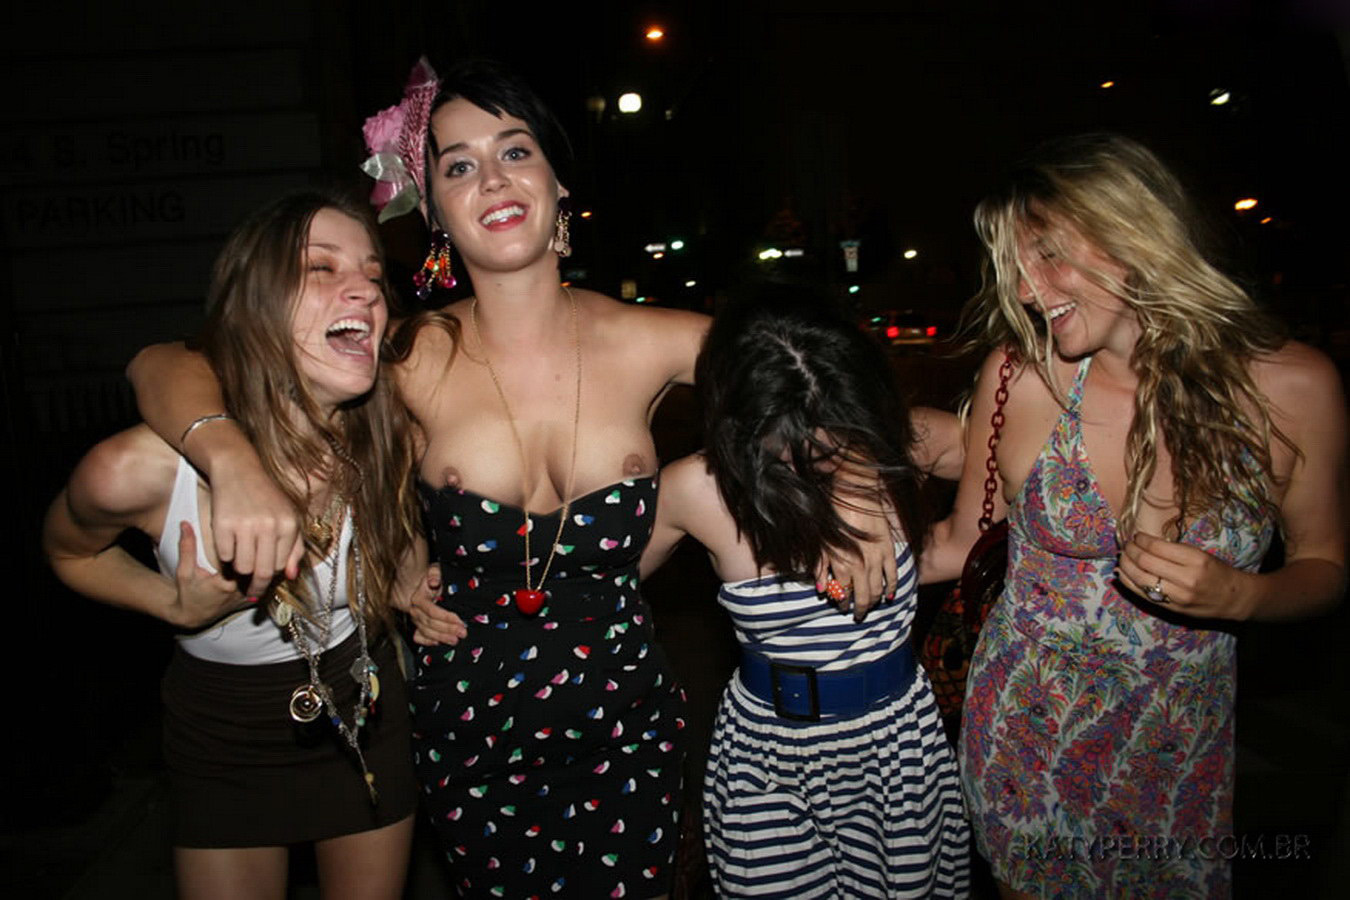 Katy_Perry_bobsslip_drunk_cleavage_downblouse_upskirt_nipslip_at_her_birthday_2007_party_99x_HQ_9.jpg